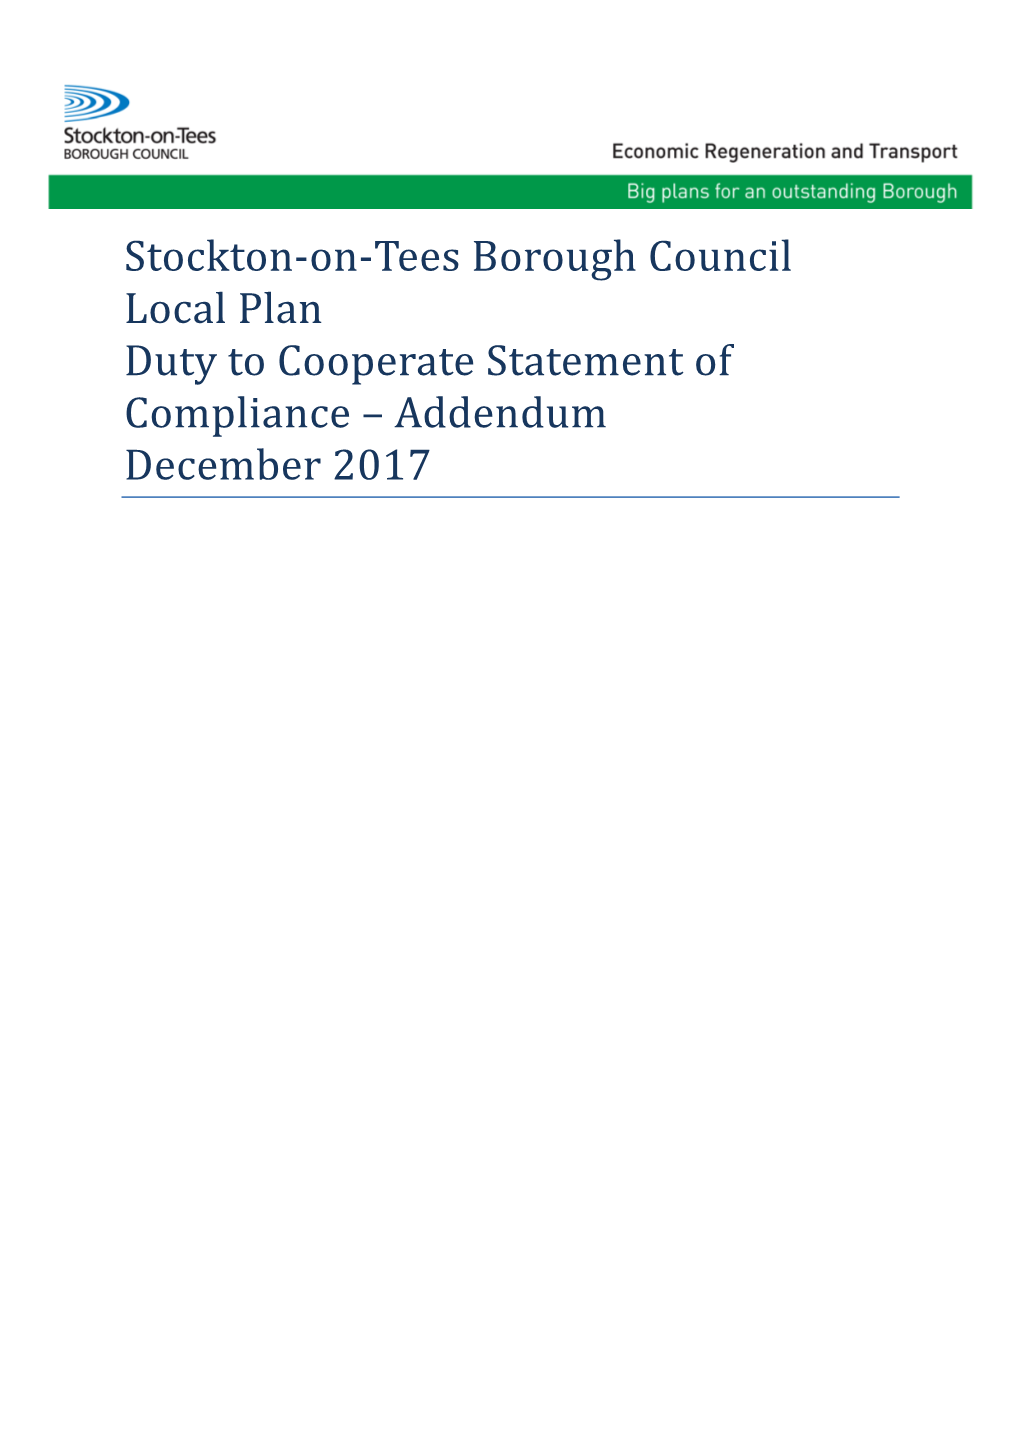 Stockton-On-Tees Borough Council Local Plan Duty to Cooperate Statement of Compliance – Addendum December 2017